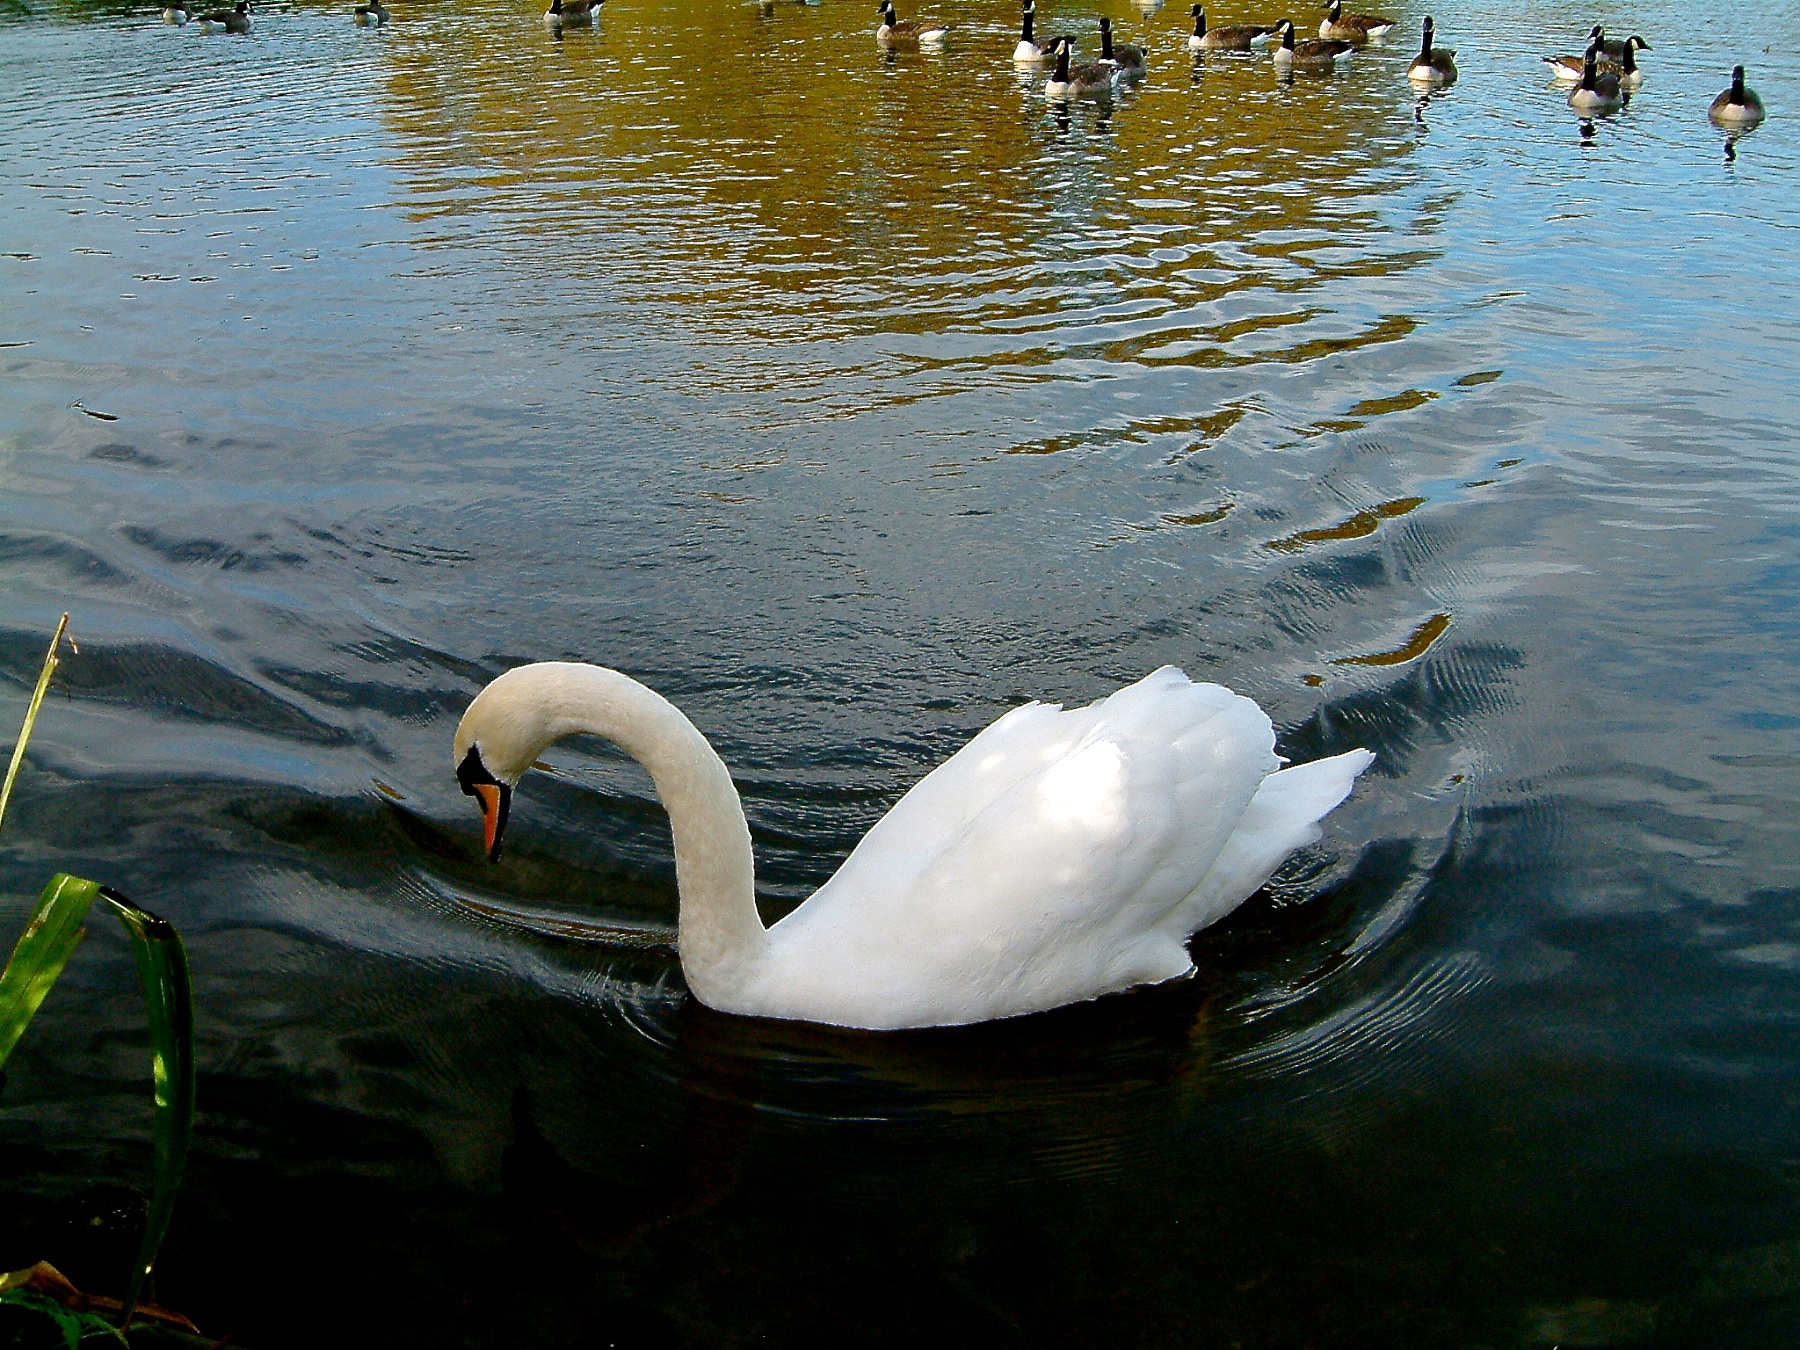 a swan swimming on a lake near some other birds